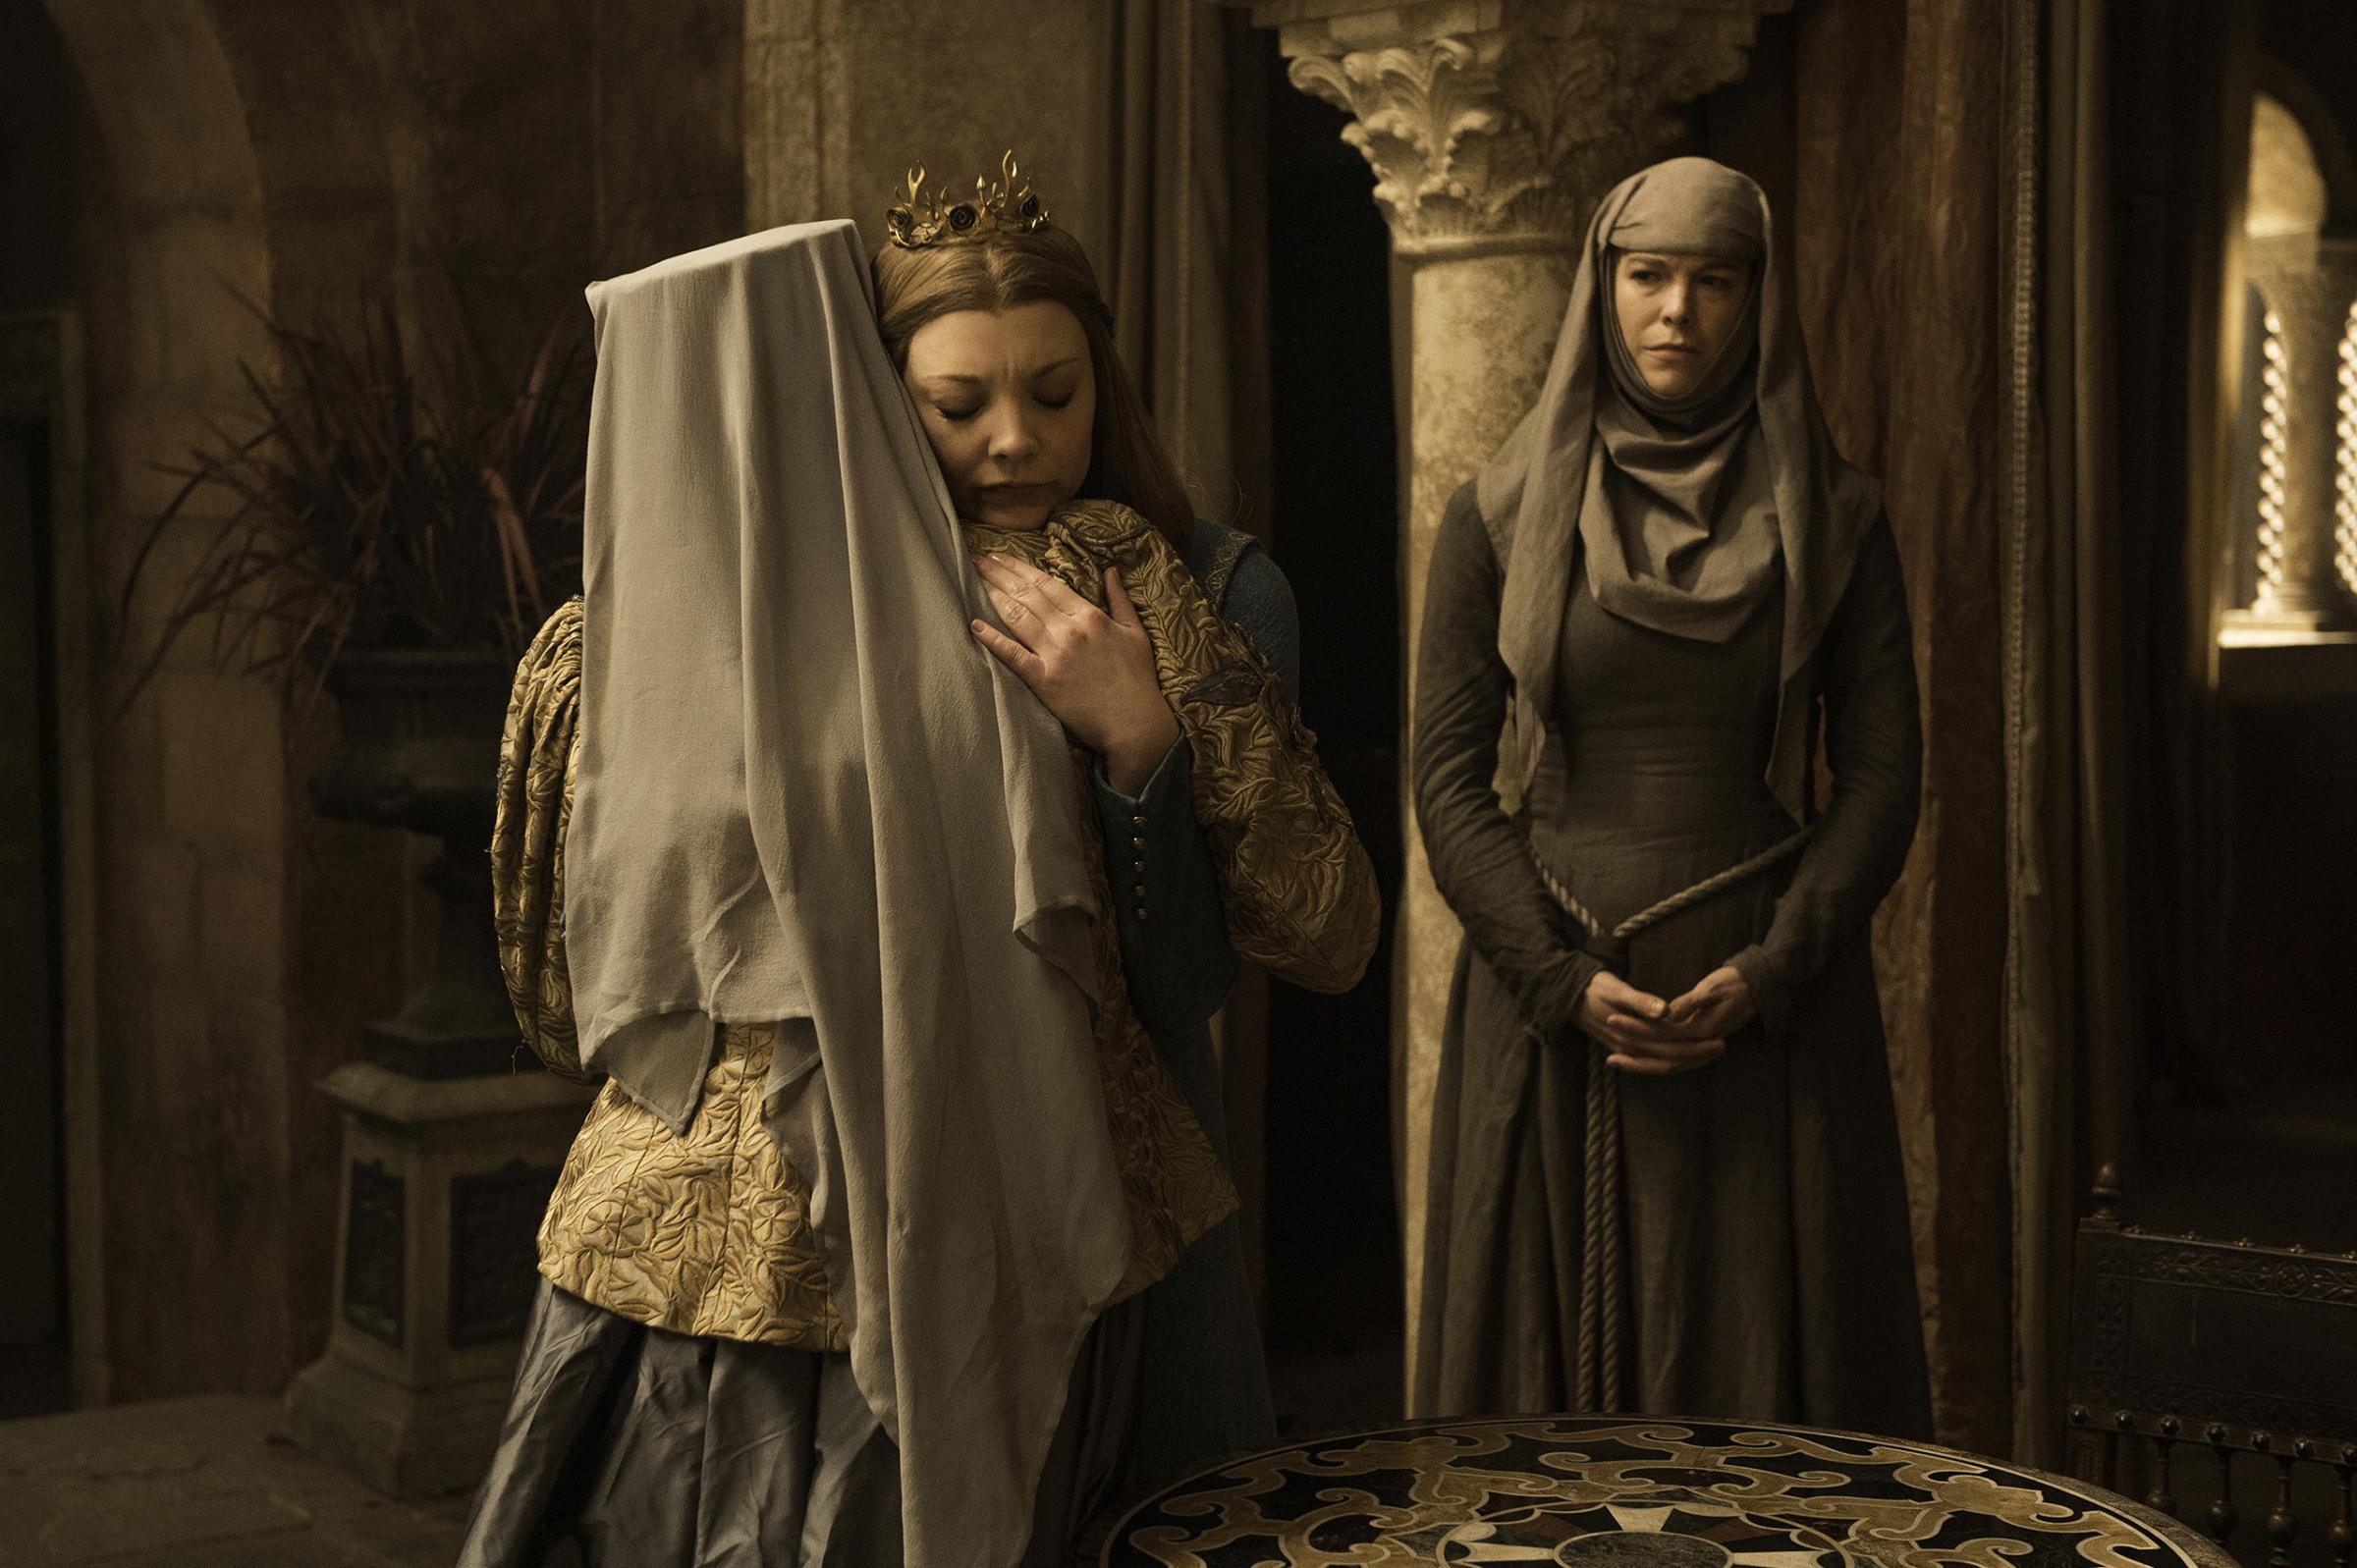 Diana Rigg (Olenna Tyrell), Natalie Dormer (Margery Tyrell), and Hannah Waddingham (Septa Unella) in Game of Thrones.